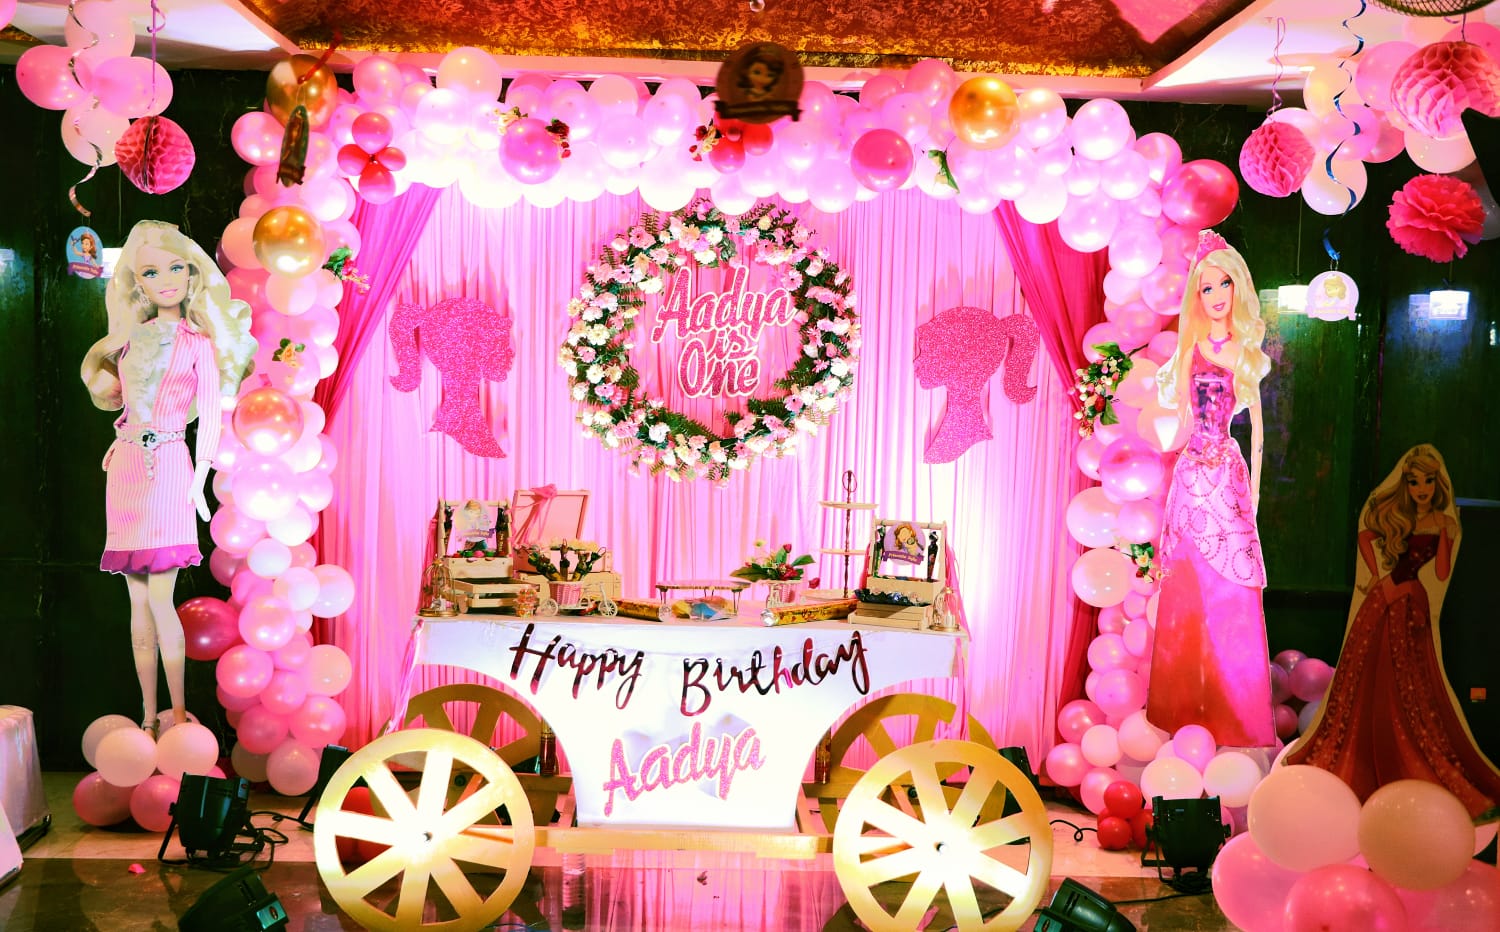 Barbie Theme Decorations for your Baby Girl's Grand Birthday Celebrations